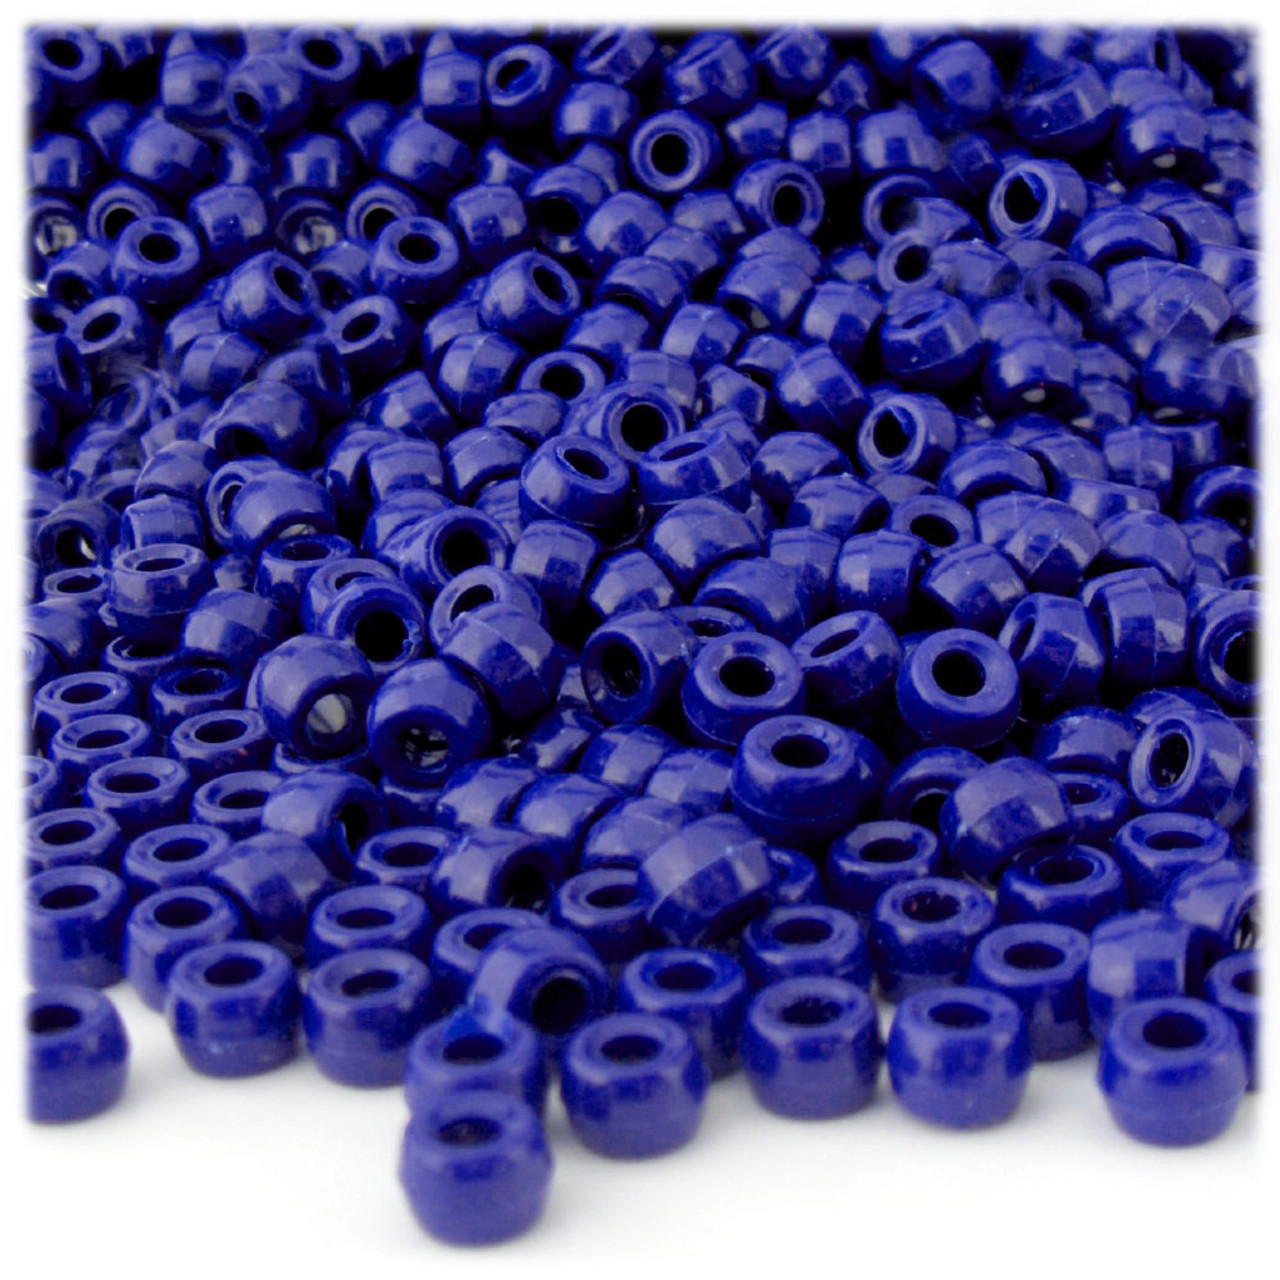 The Crafts Outlet 1000-Piece Plastic Round Opaque Pony Beads 9 by 6mm Royal Blue